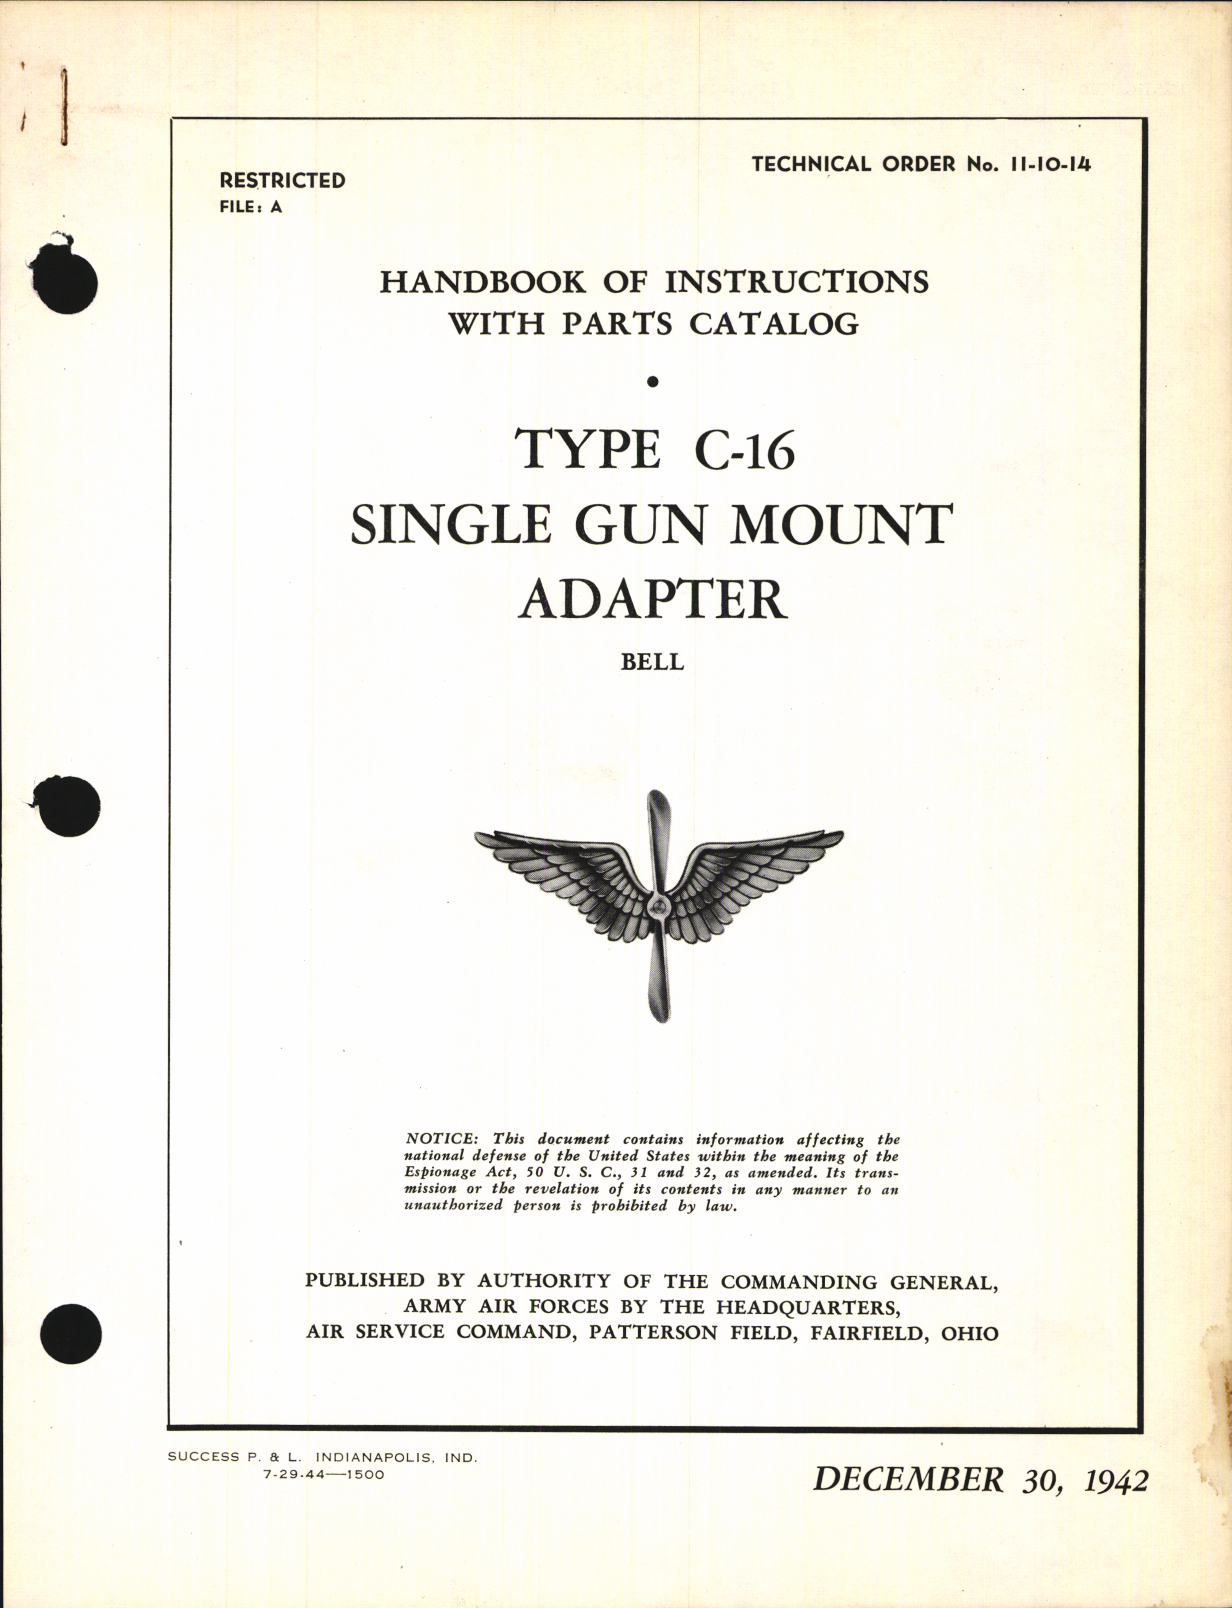 Sample page 1 from AirCorps Library document: Handbook of Instructions with Parts Catalog for Type C-16 Single Gun Mount Adapter